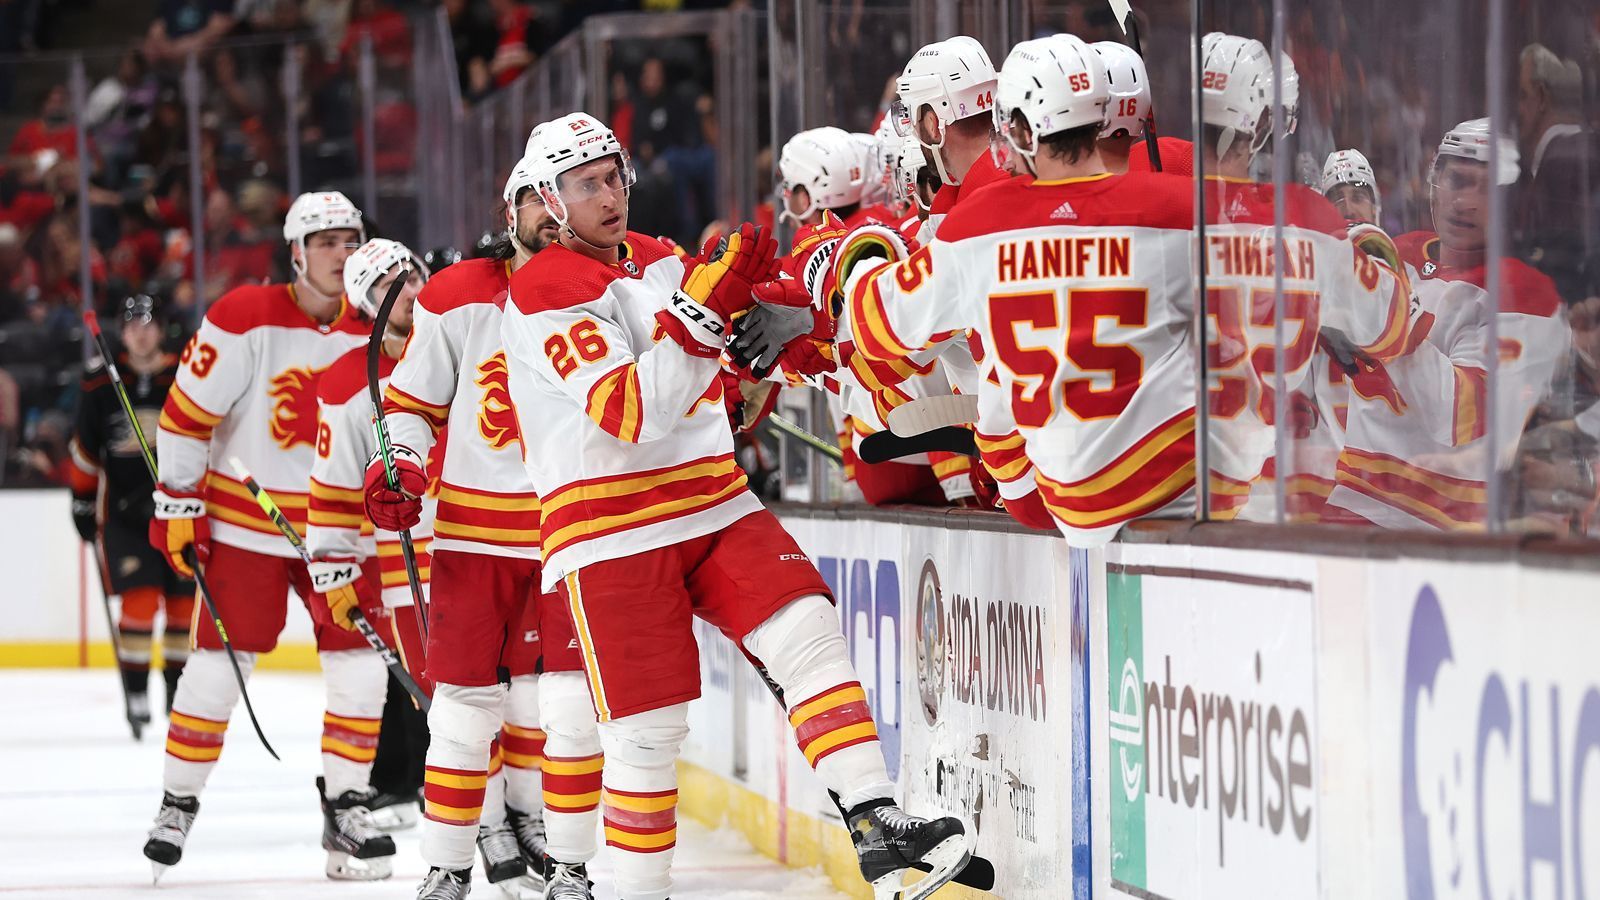 
                <strong>Calgary Flames (Western Conference)</strong><br>
                &#x2022; Bilanz: 50-20-10<br>&#x2022; Punkte: 110<br>&#x2022; Top-Scorer: Johnny Gaudreau mit 113 Punkten<br>&#x2022; Erster Gegner: Dallas Stars<br>
              